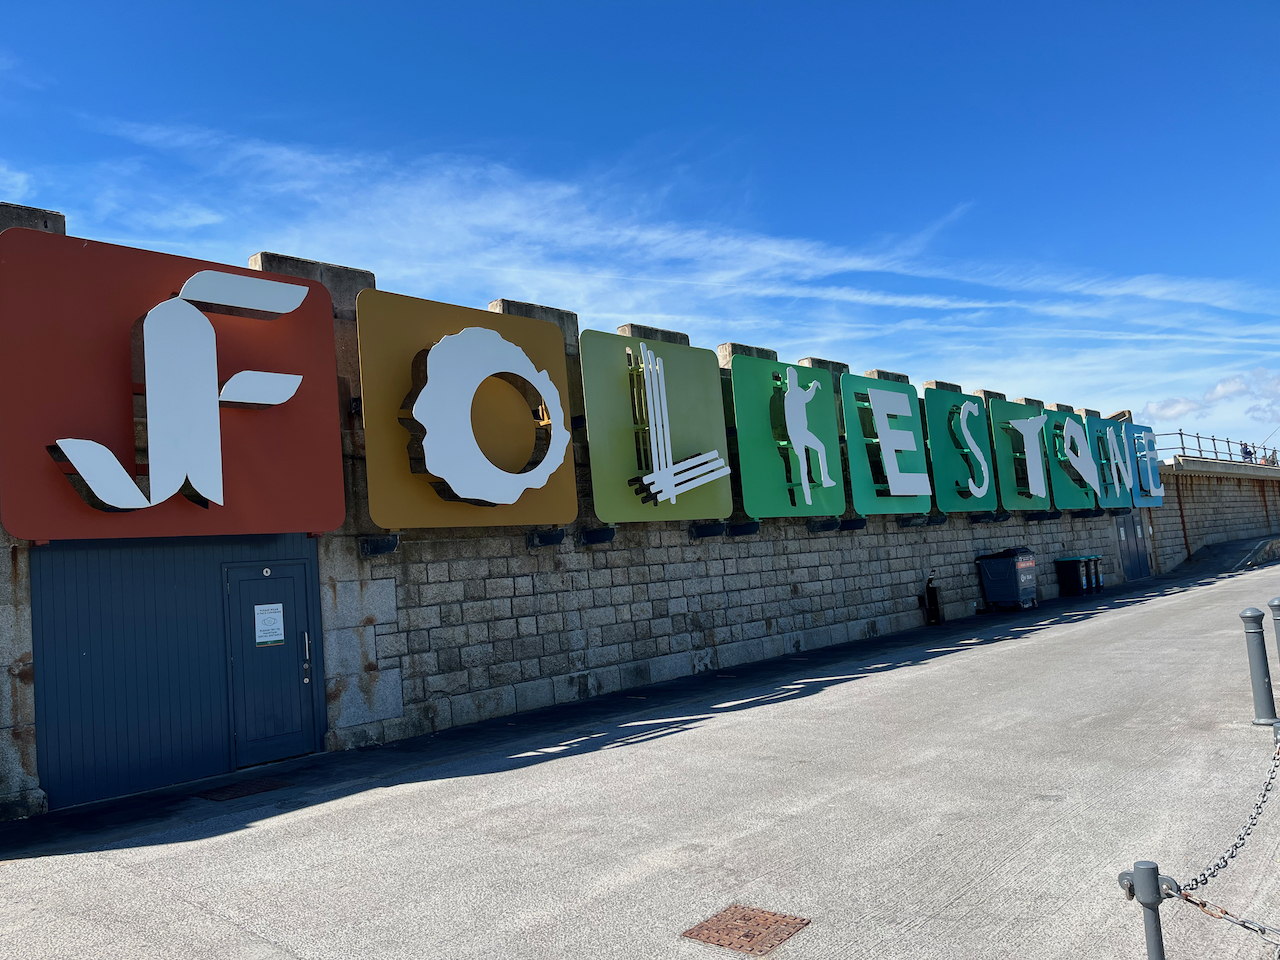 A long wall sign made up of very large coloured blocks that spell out the word Folkestone in stylised white letters. Each letter is styled differently, with the K in particular looking like a person holding up their left arm and leg to form the letter.